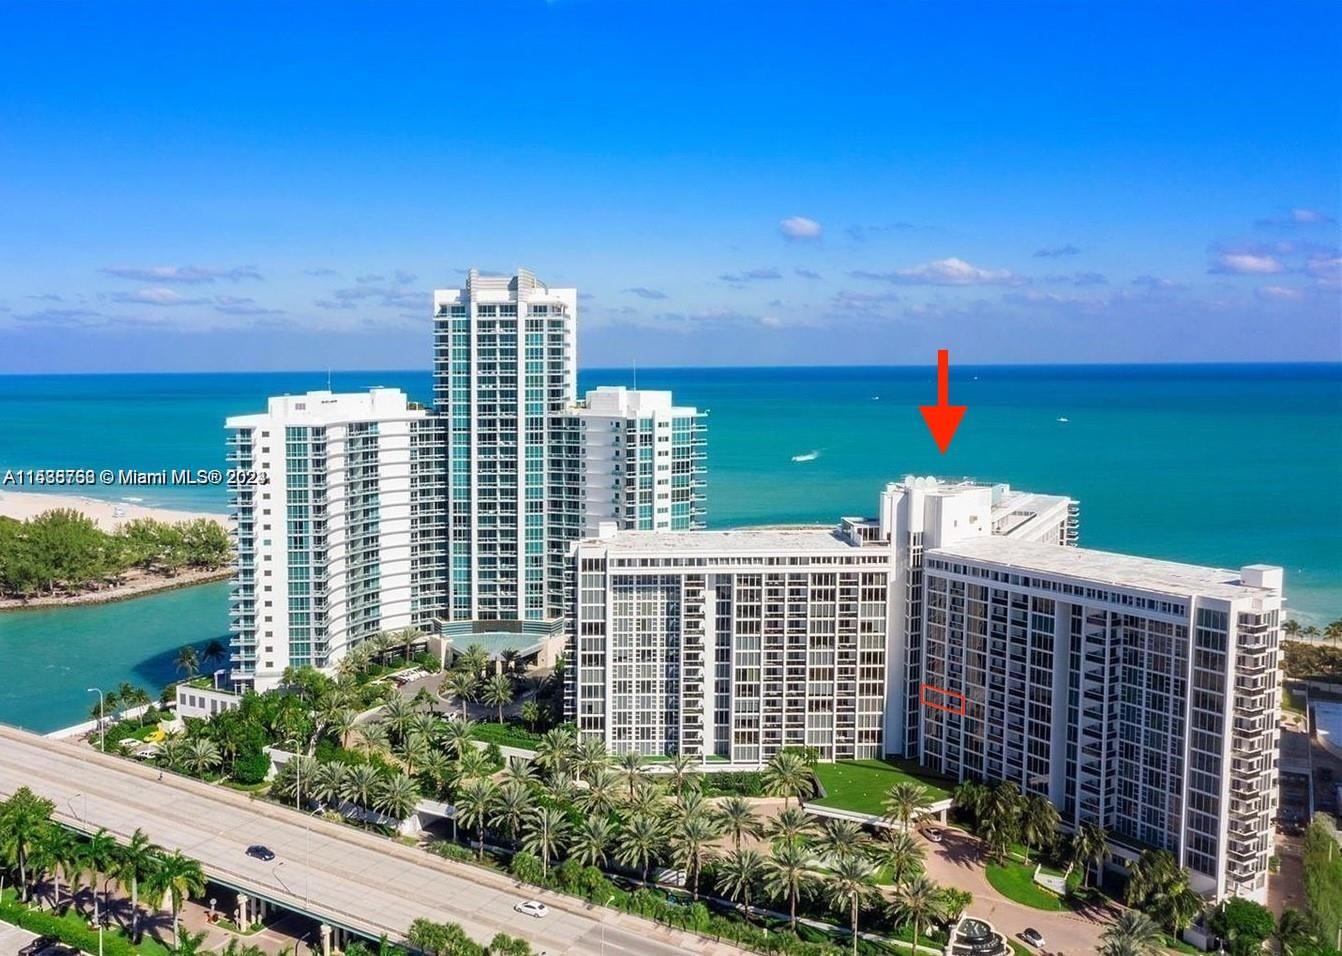 Enjoy oceanfront living in stunning Bal Harbour! This luminous and airy 1 bedroom, 1.5 bathroom apartment in the Harbour House Condominium offers the comforts of beachfront living with stunning city and intracoastal views. This fully furnished unit features a spacious living/dining room, an ample kitchen with stainless steel appliances and granite countertops, porcelain tile floors, and floor-to-ceiling high-impact hurricane windows and door. The Harbour House Condominium offers Wi-Fi, cable, pest control, 24/7 security, front desk concierge, on-site management, walking distance to the Bal Harbour Shops, dining venues, restaurants, and more.